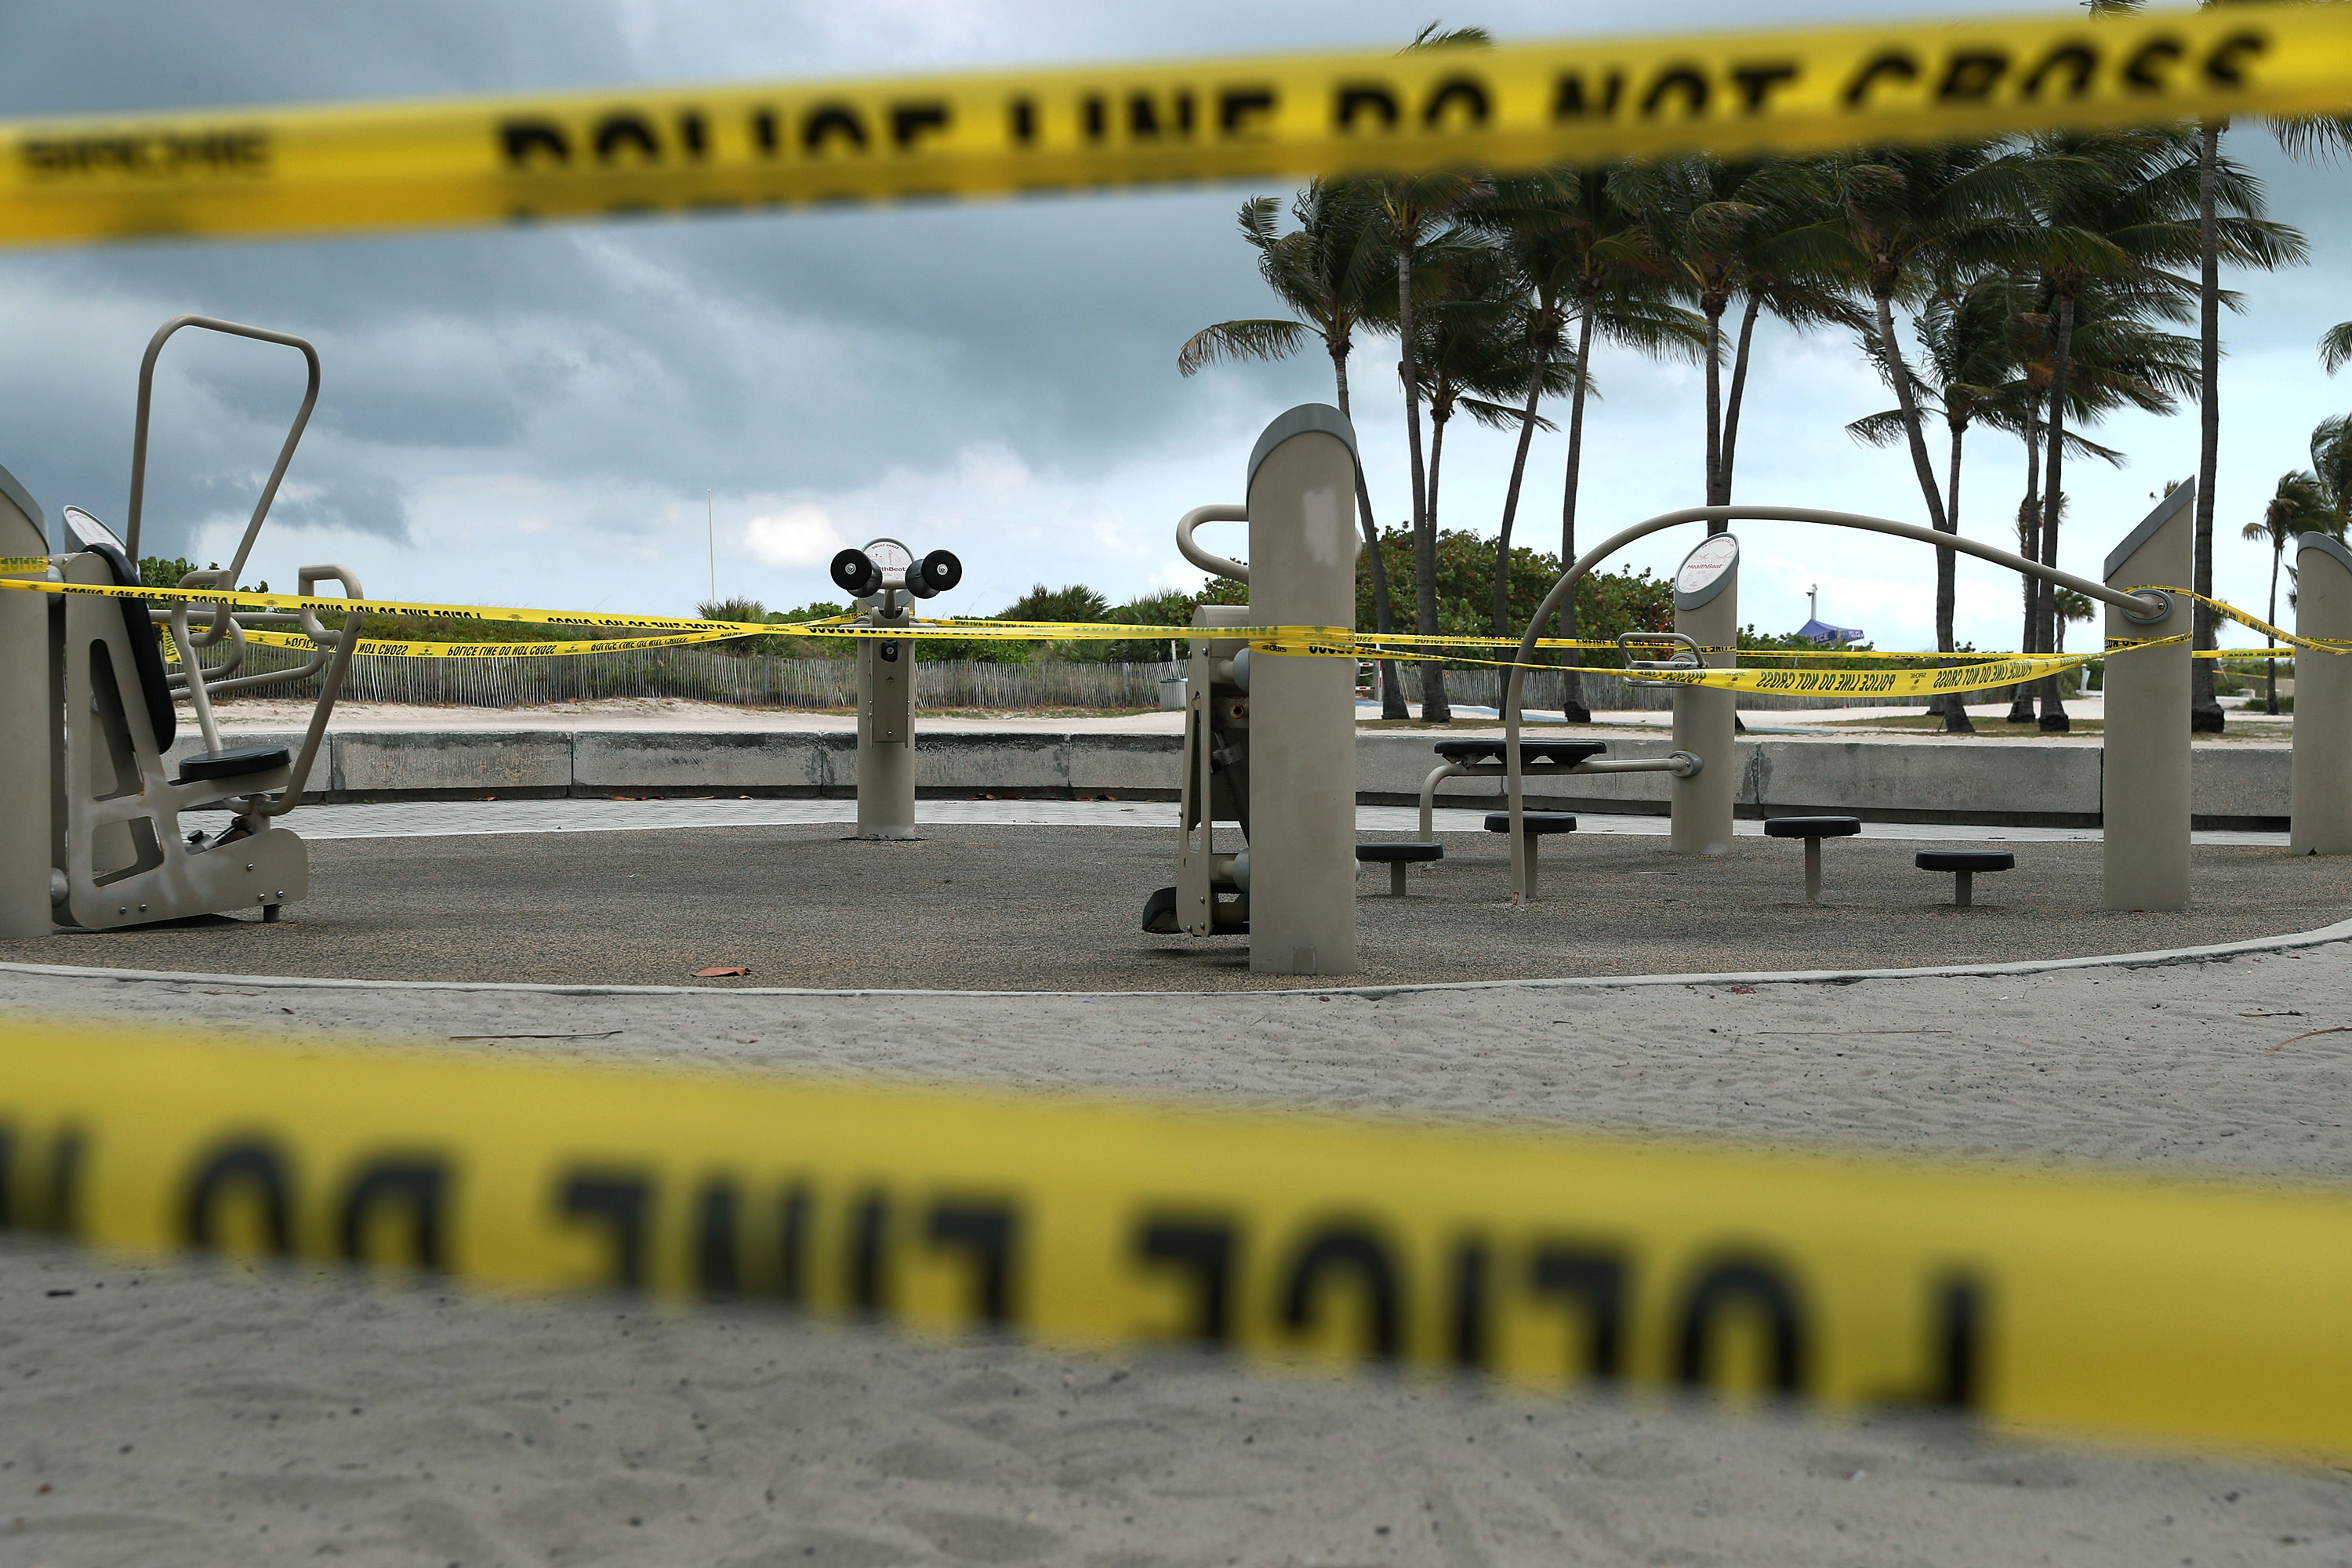 Apparent human remains suddenly wash up on Florida beach